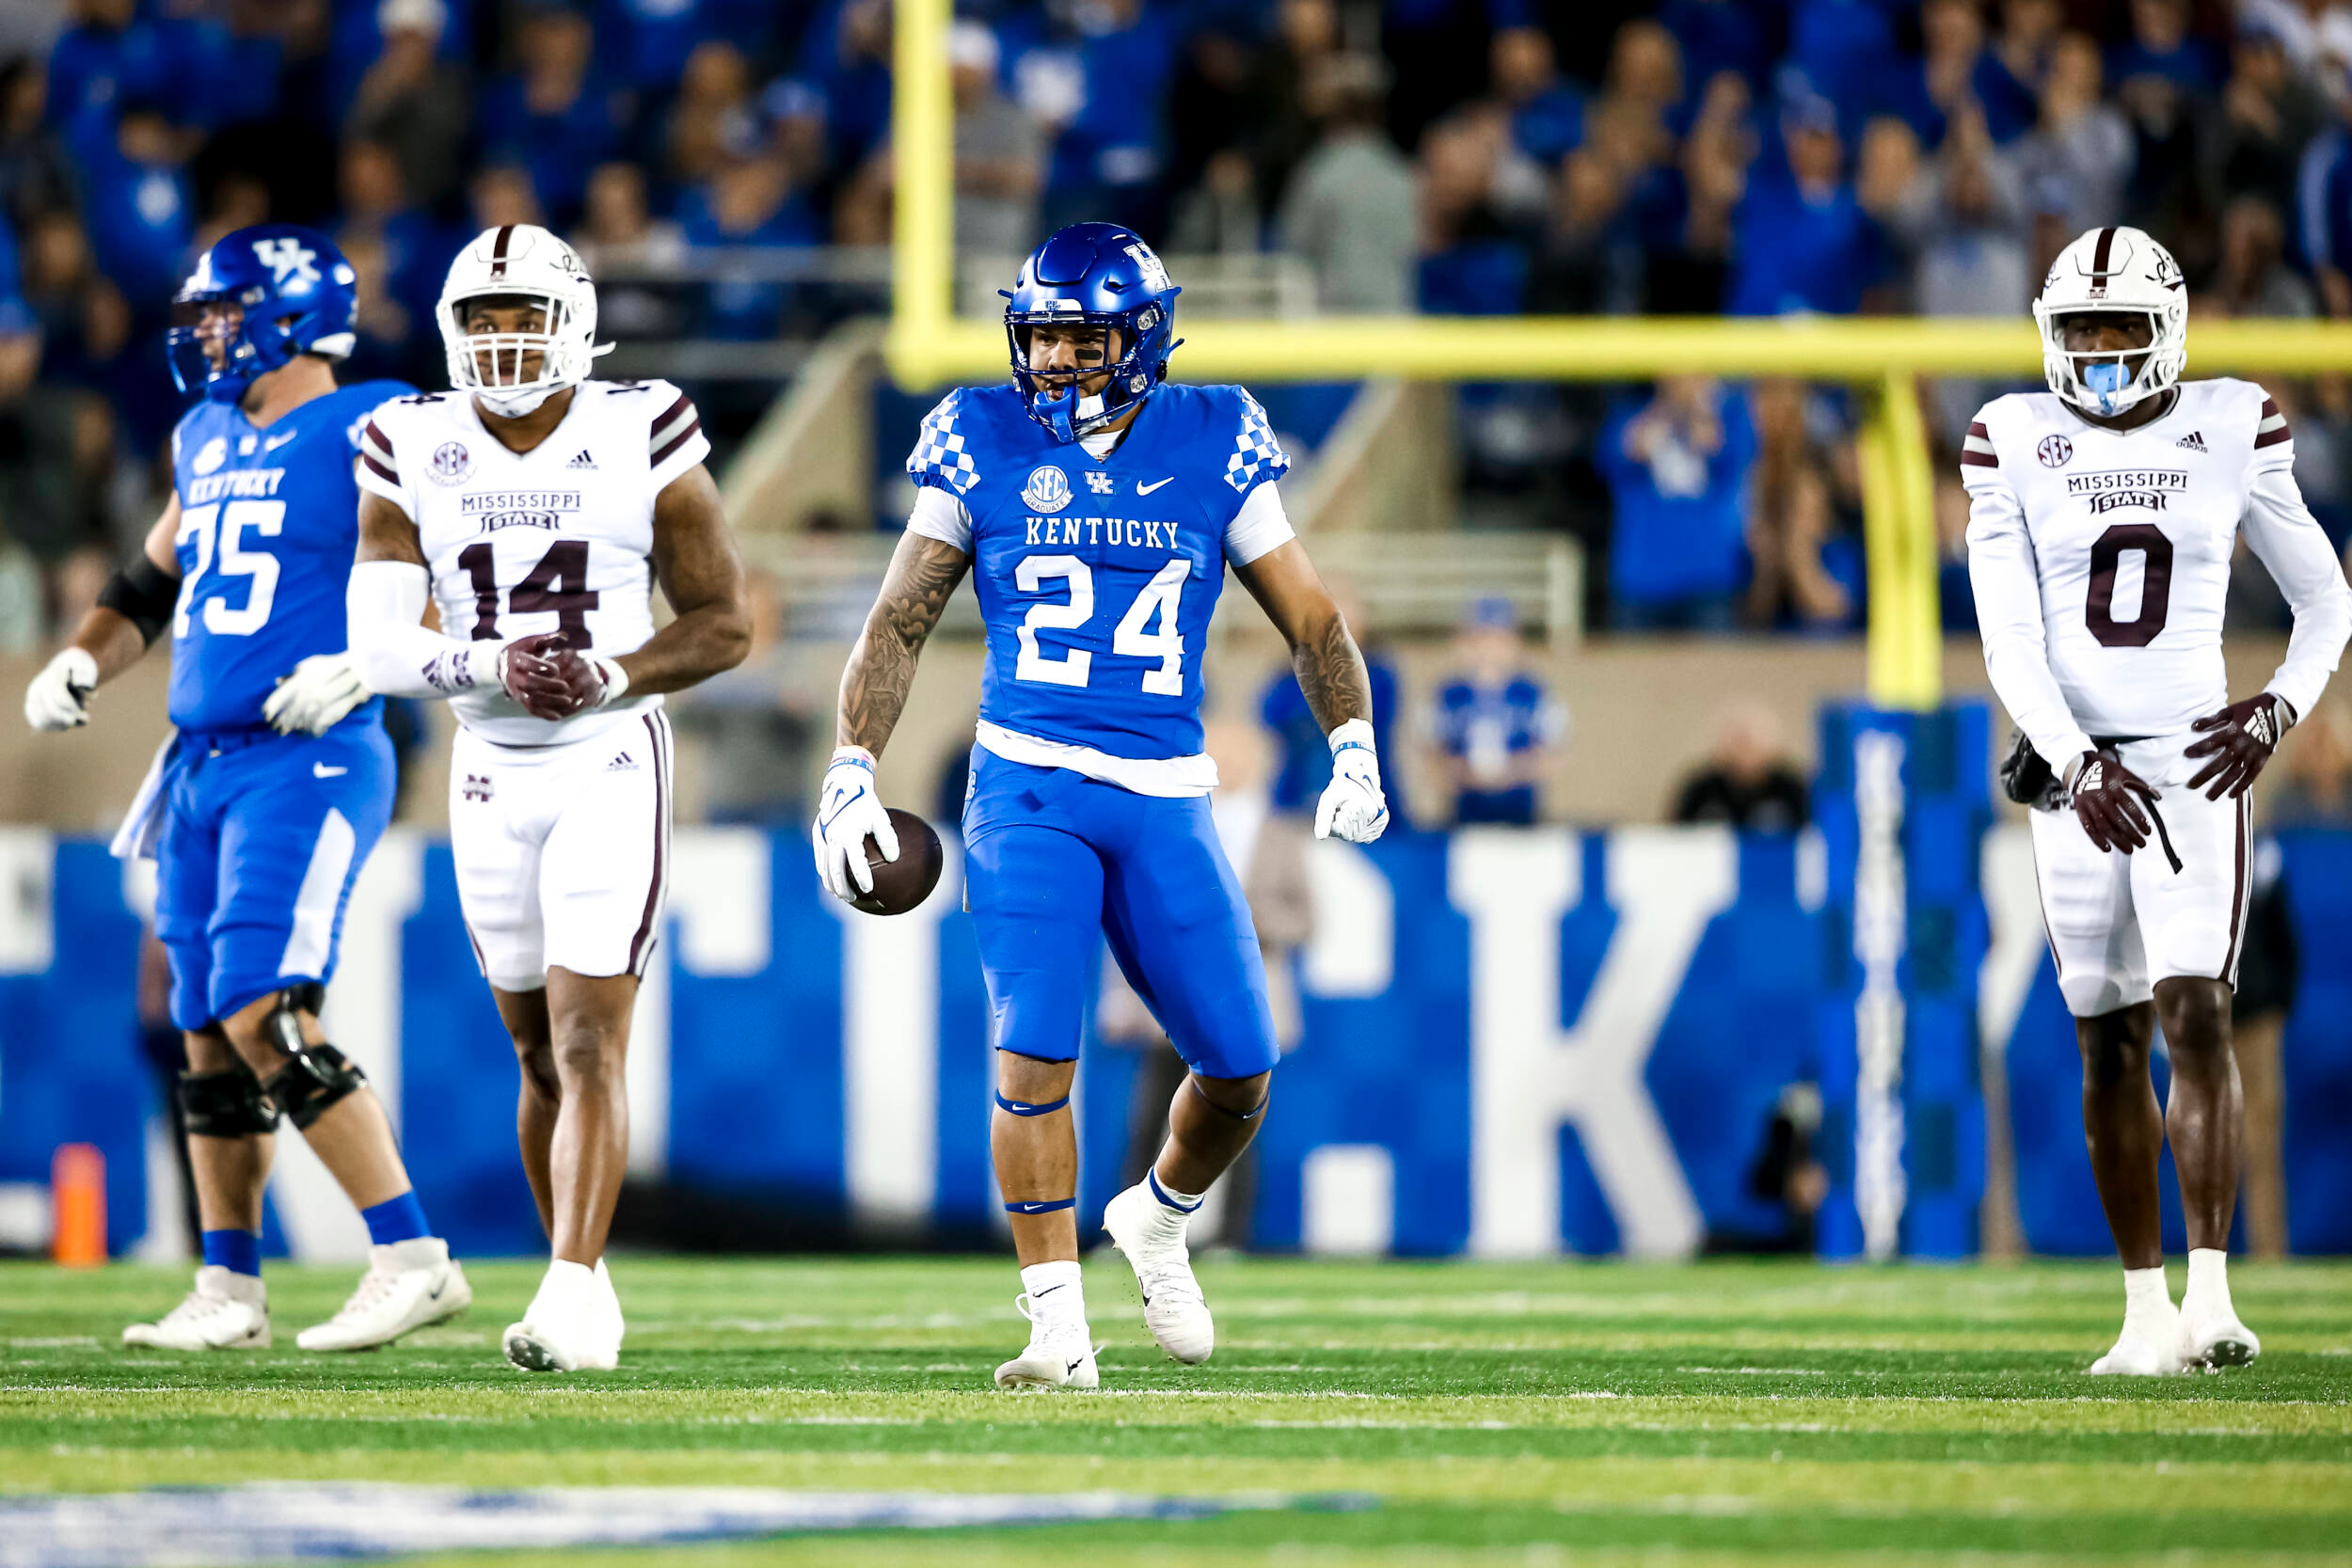 Cats Preparing for Challenge, Opportunity at No. 3 Tennessee